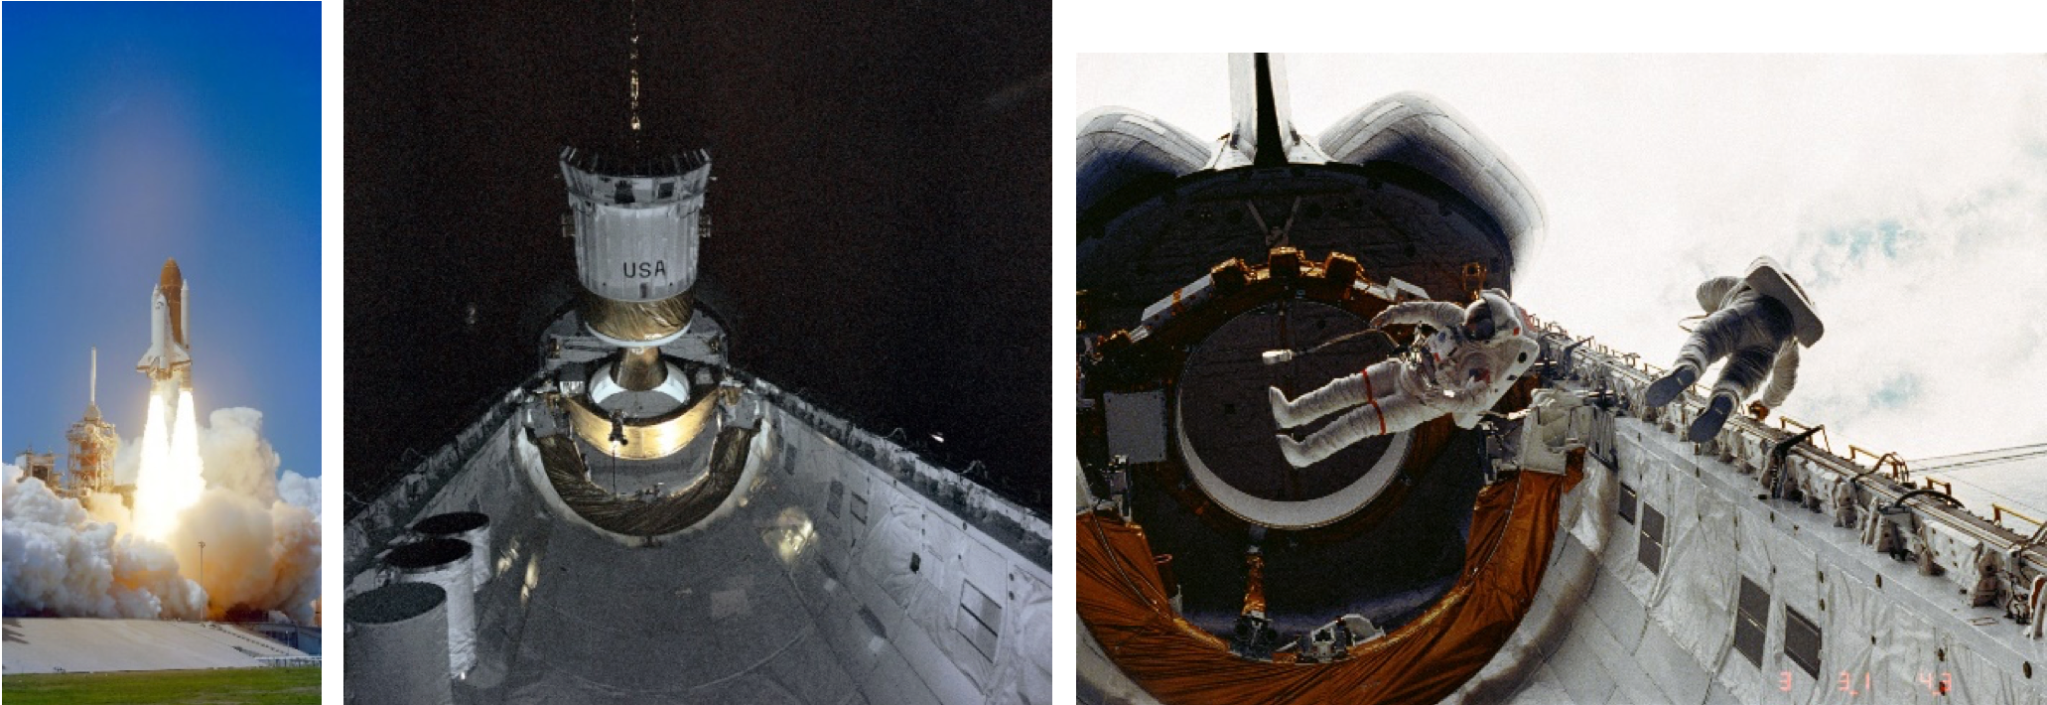 Trio of images showing the first Challenge launch, then two pictures of Challenger in orbit